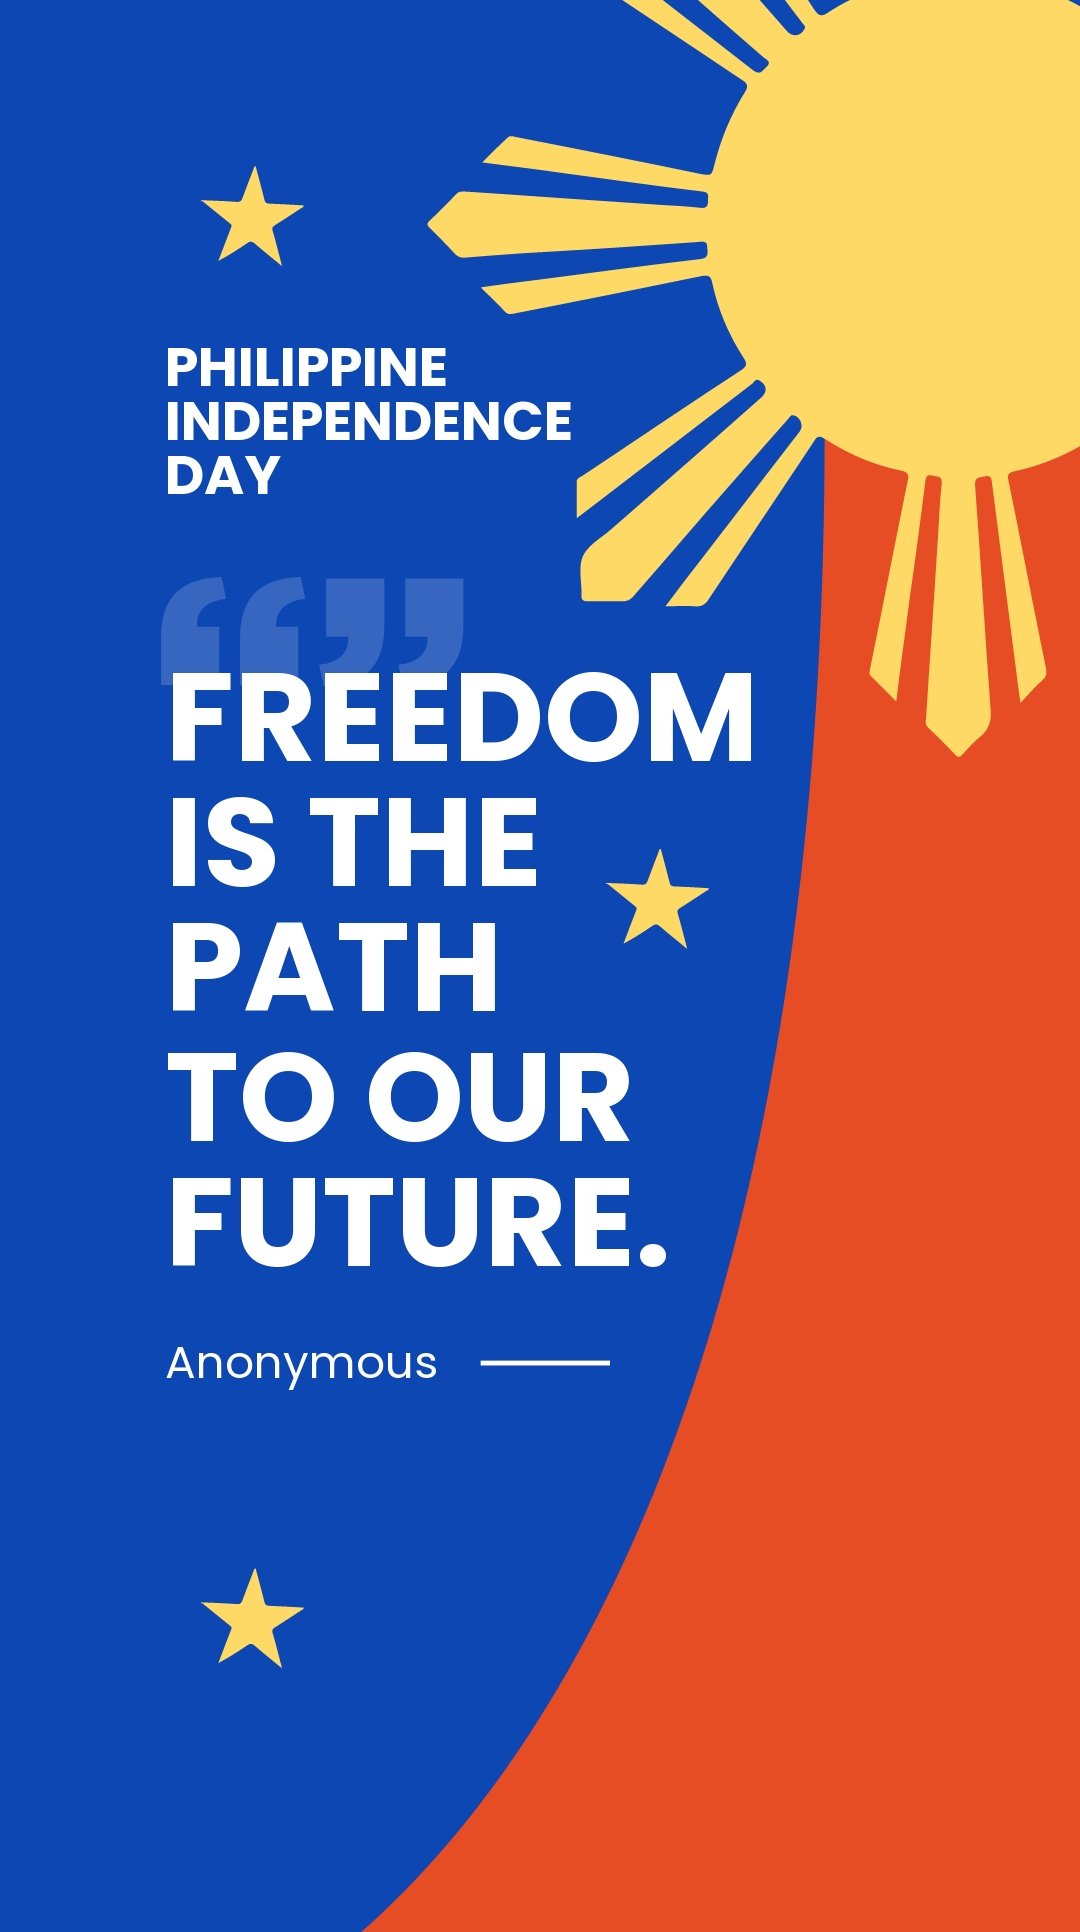 Philippines Independence Day Quote Whatsapp Post Template.jpe